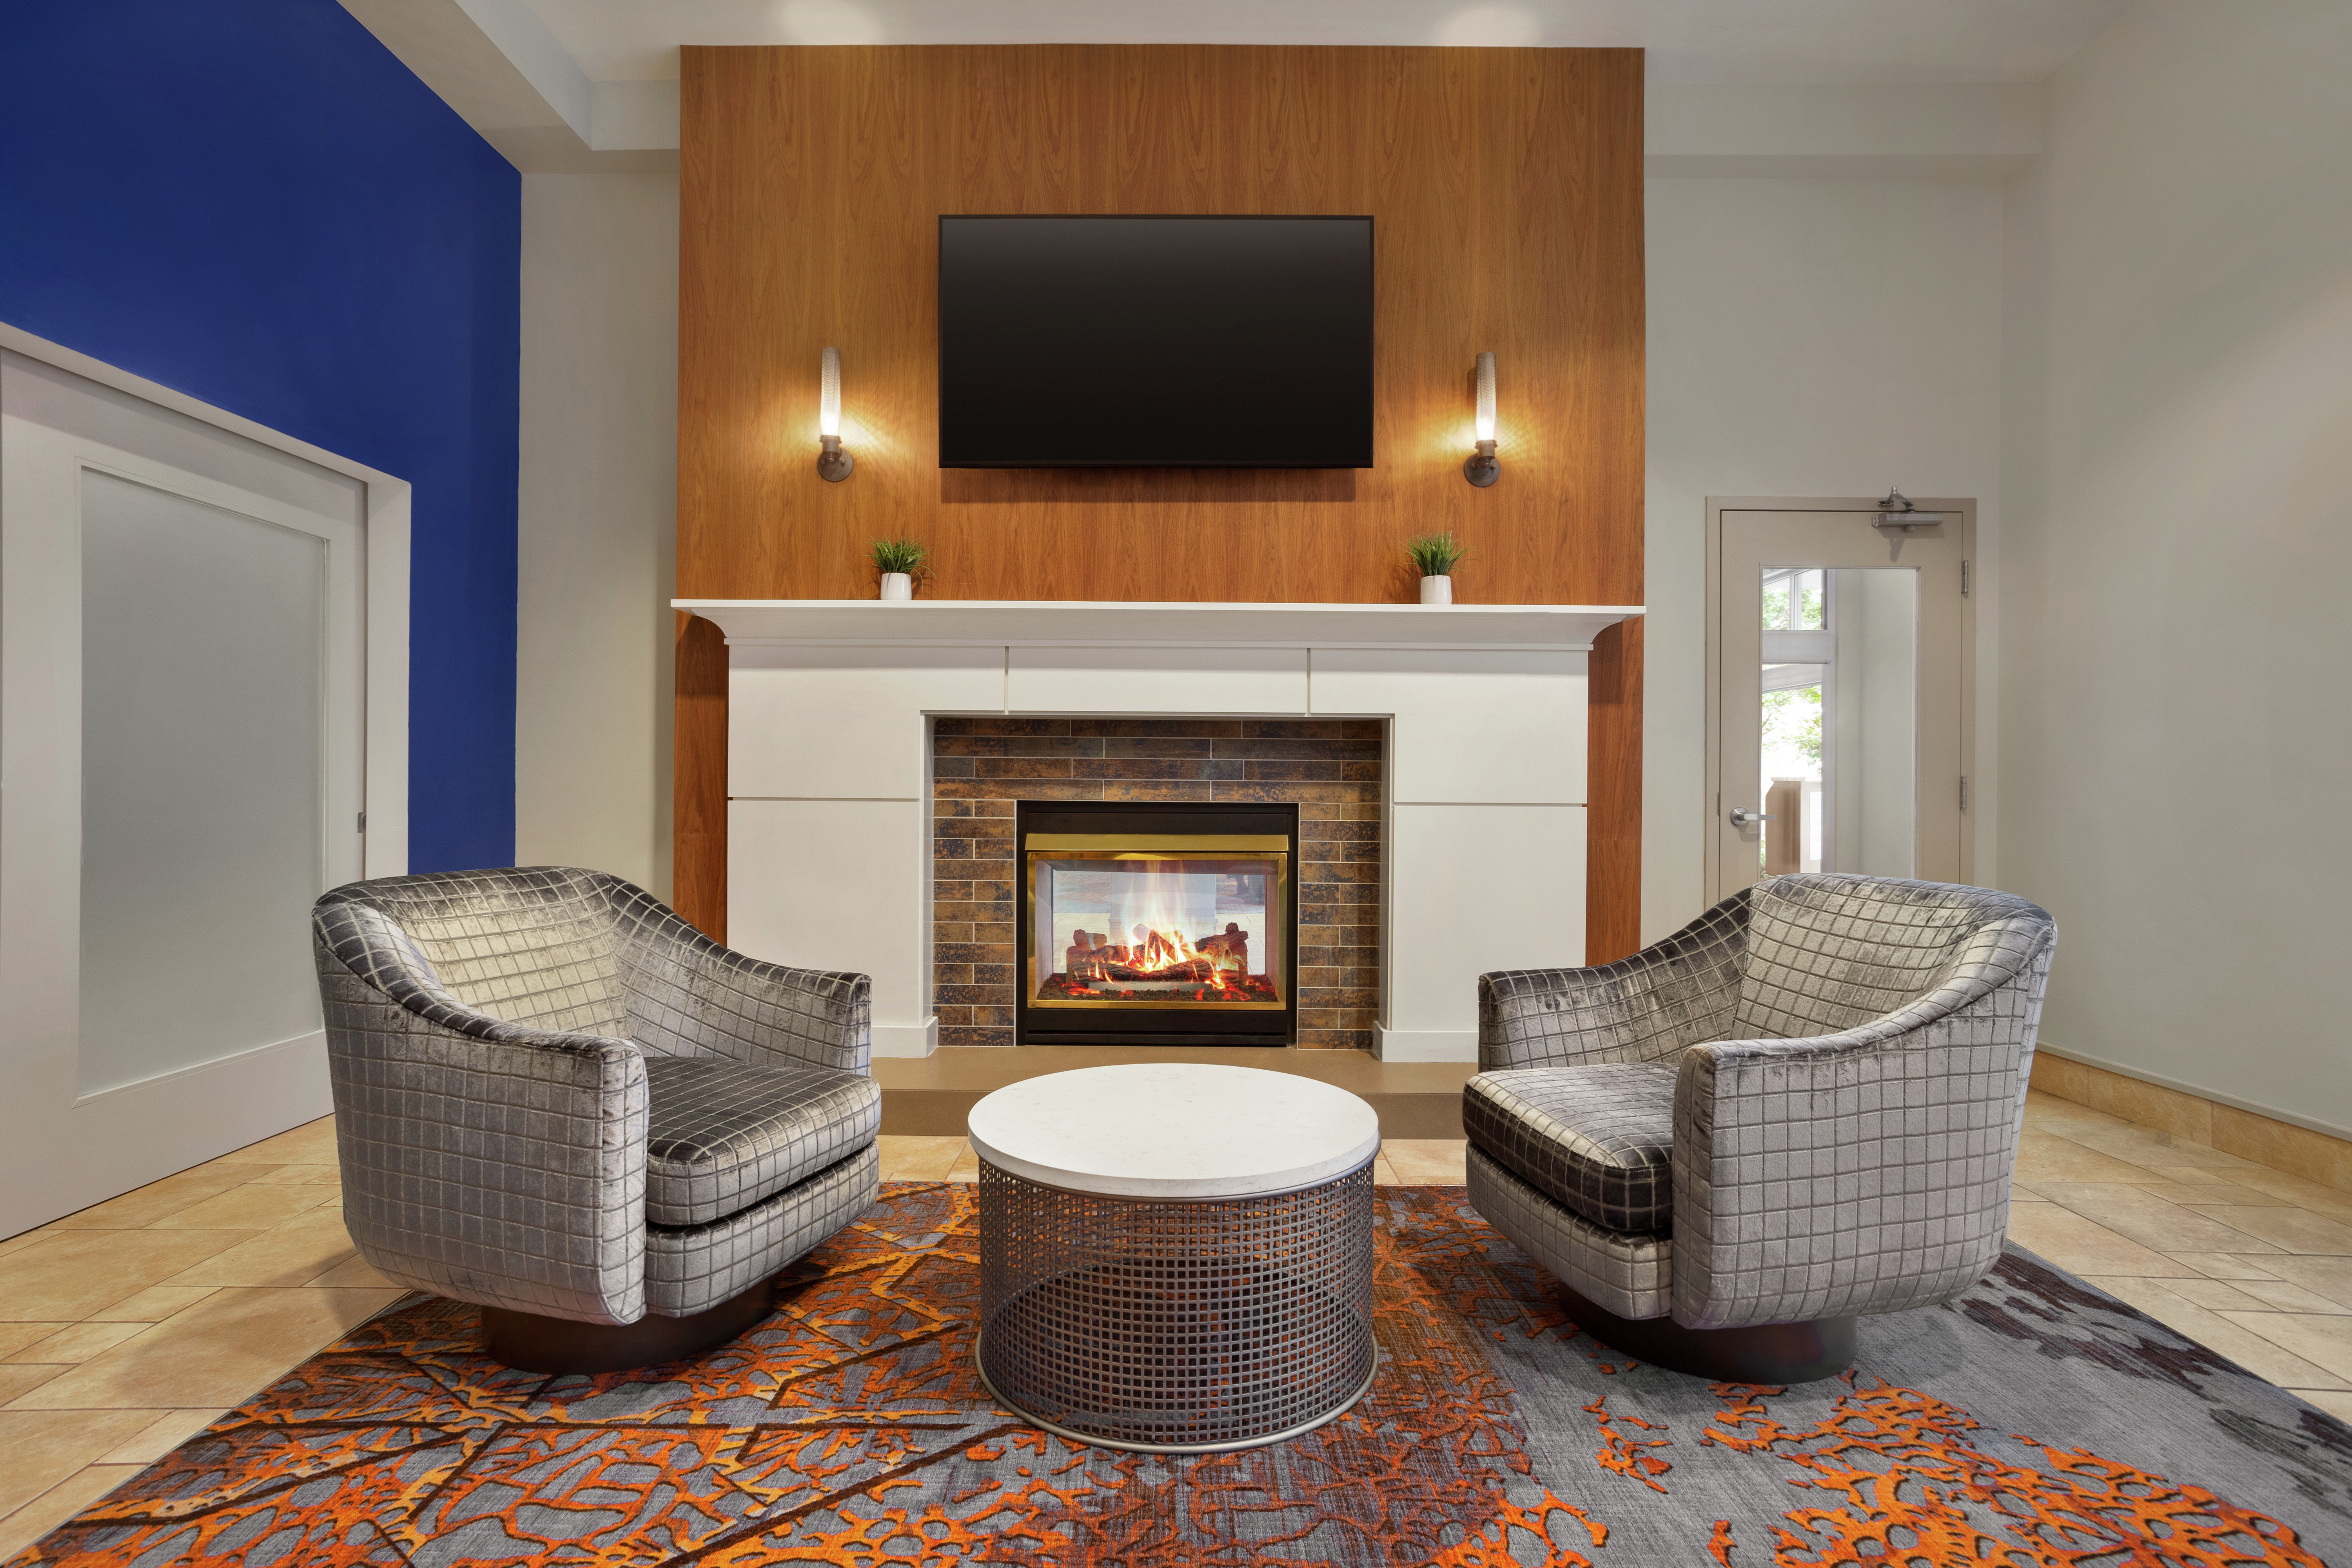 Lounge Seating Area with Fireplace and Television